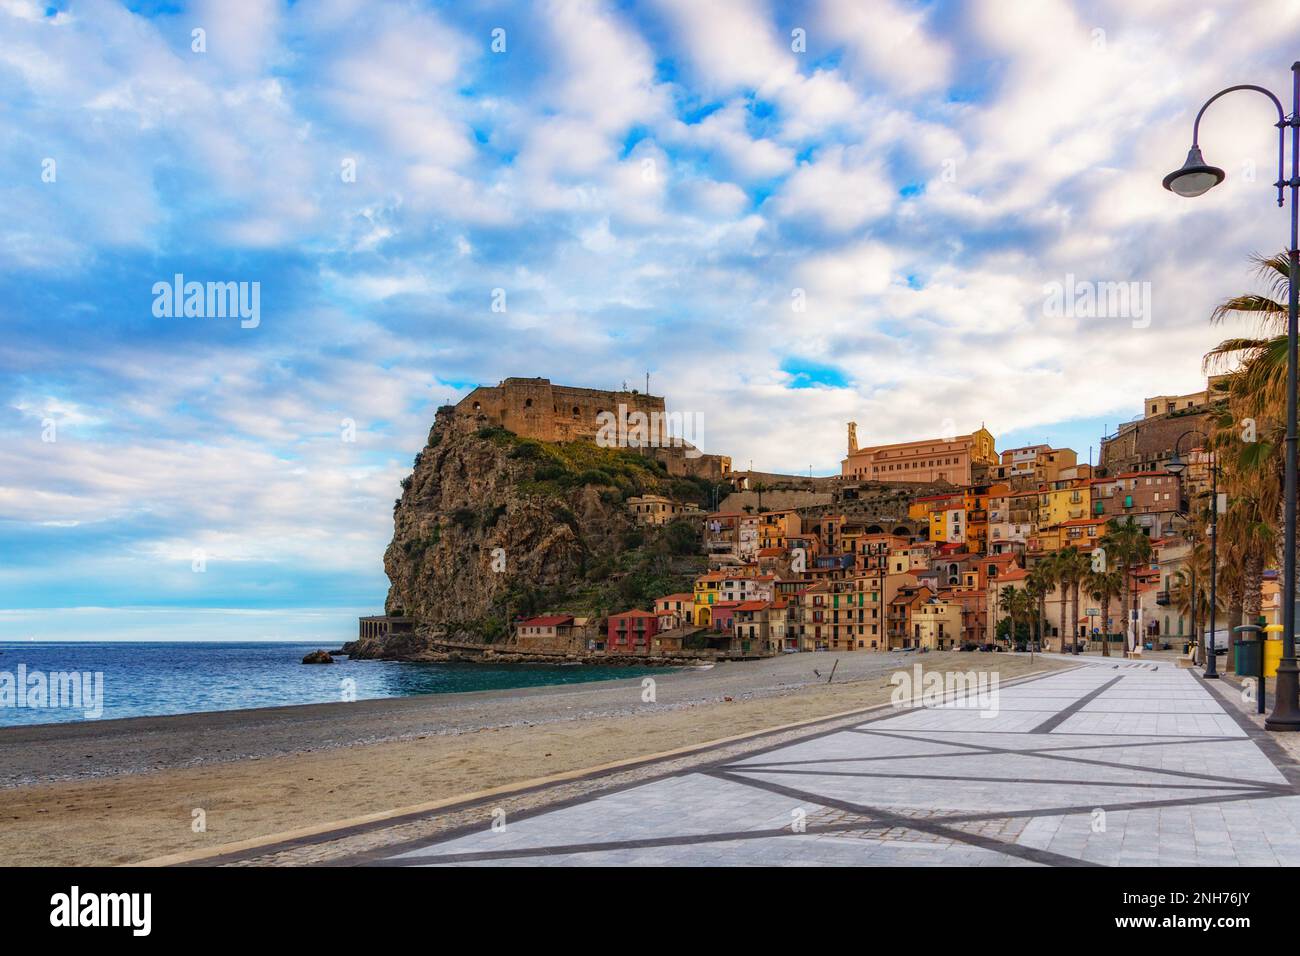 The seaside village of Scilla seen from the seafront at first morning lights, Calabria Stock Photo